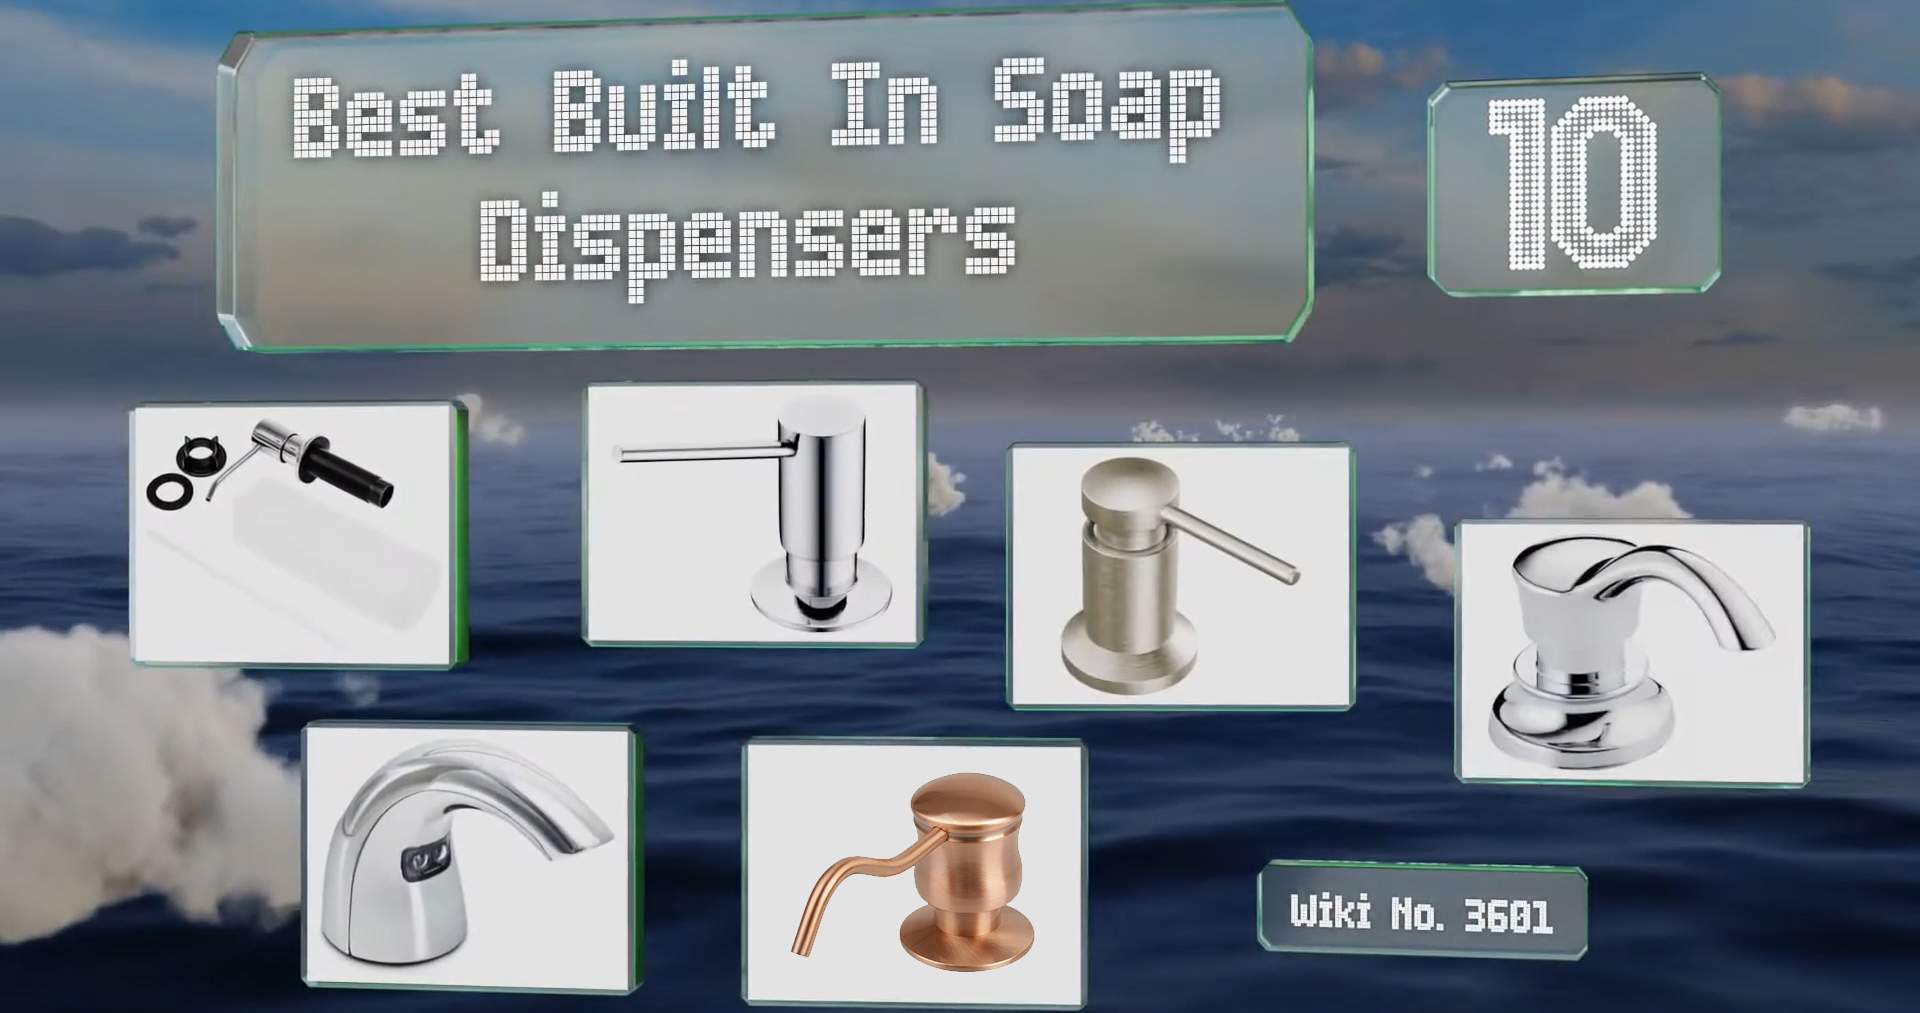 Akicon Copper chosen for a Wiki: Top 10 Built In Soap Dispensers of 2020